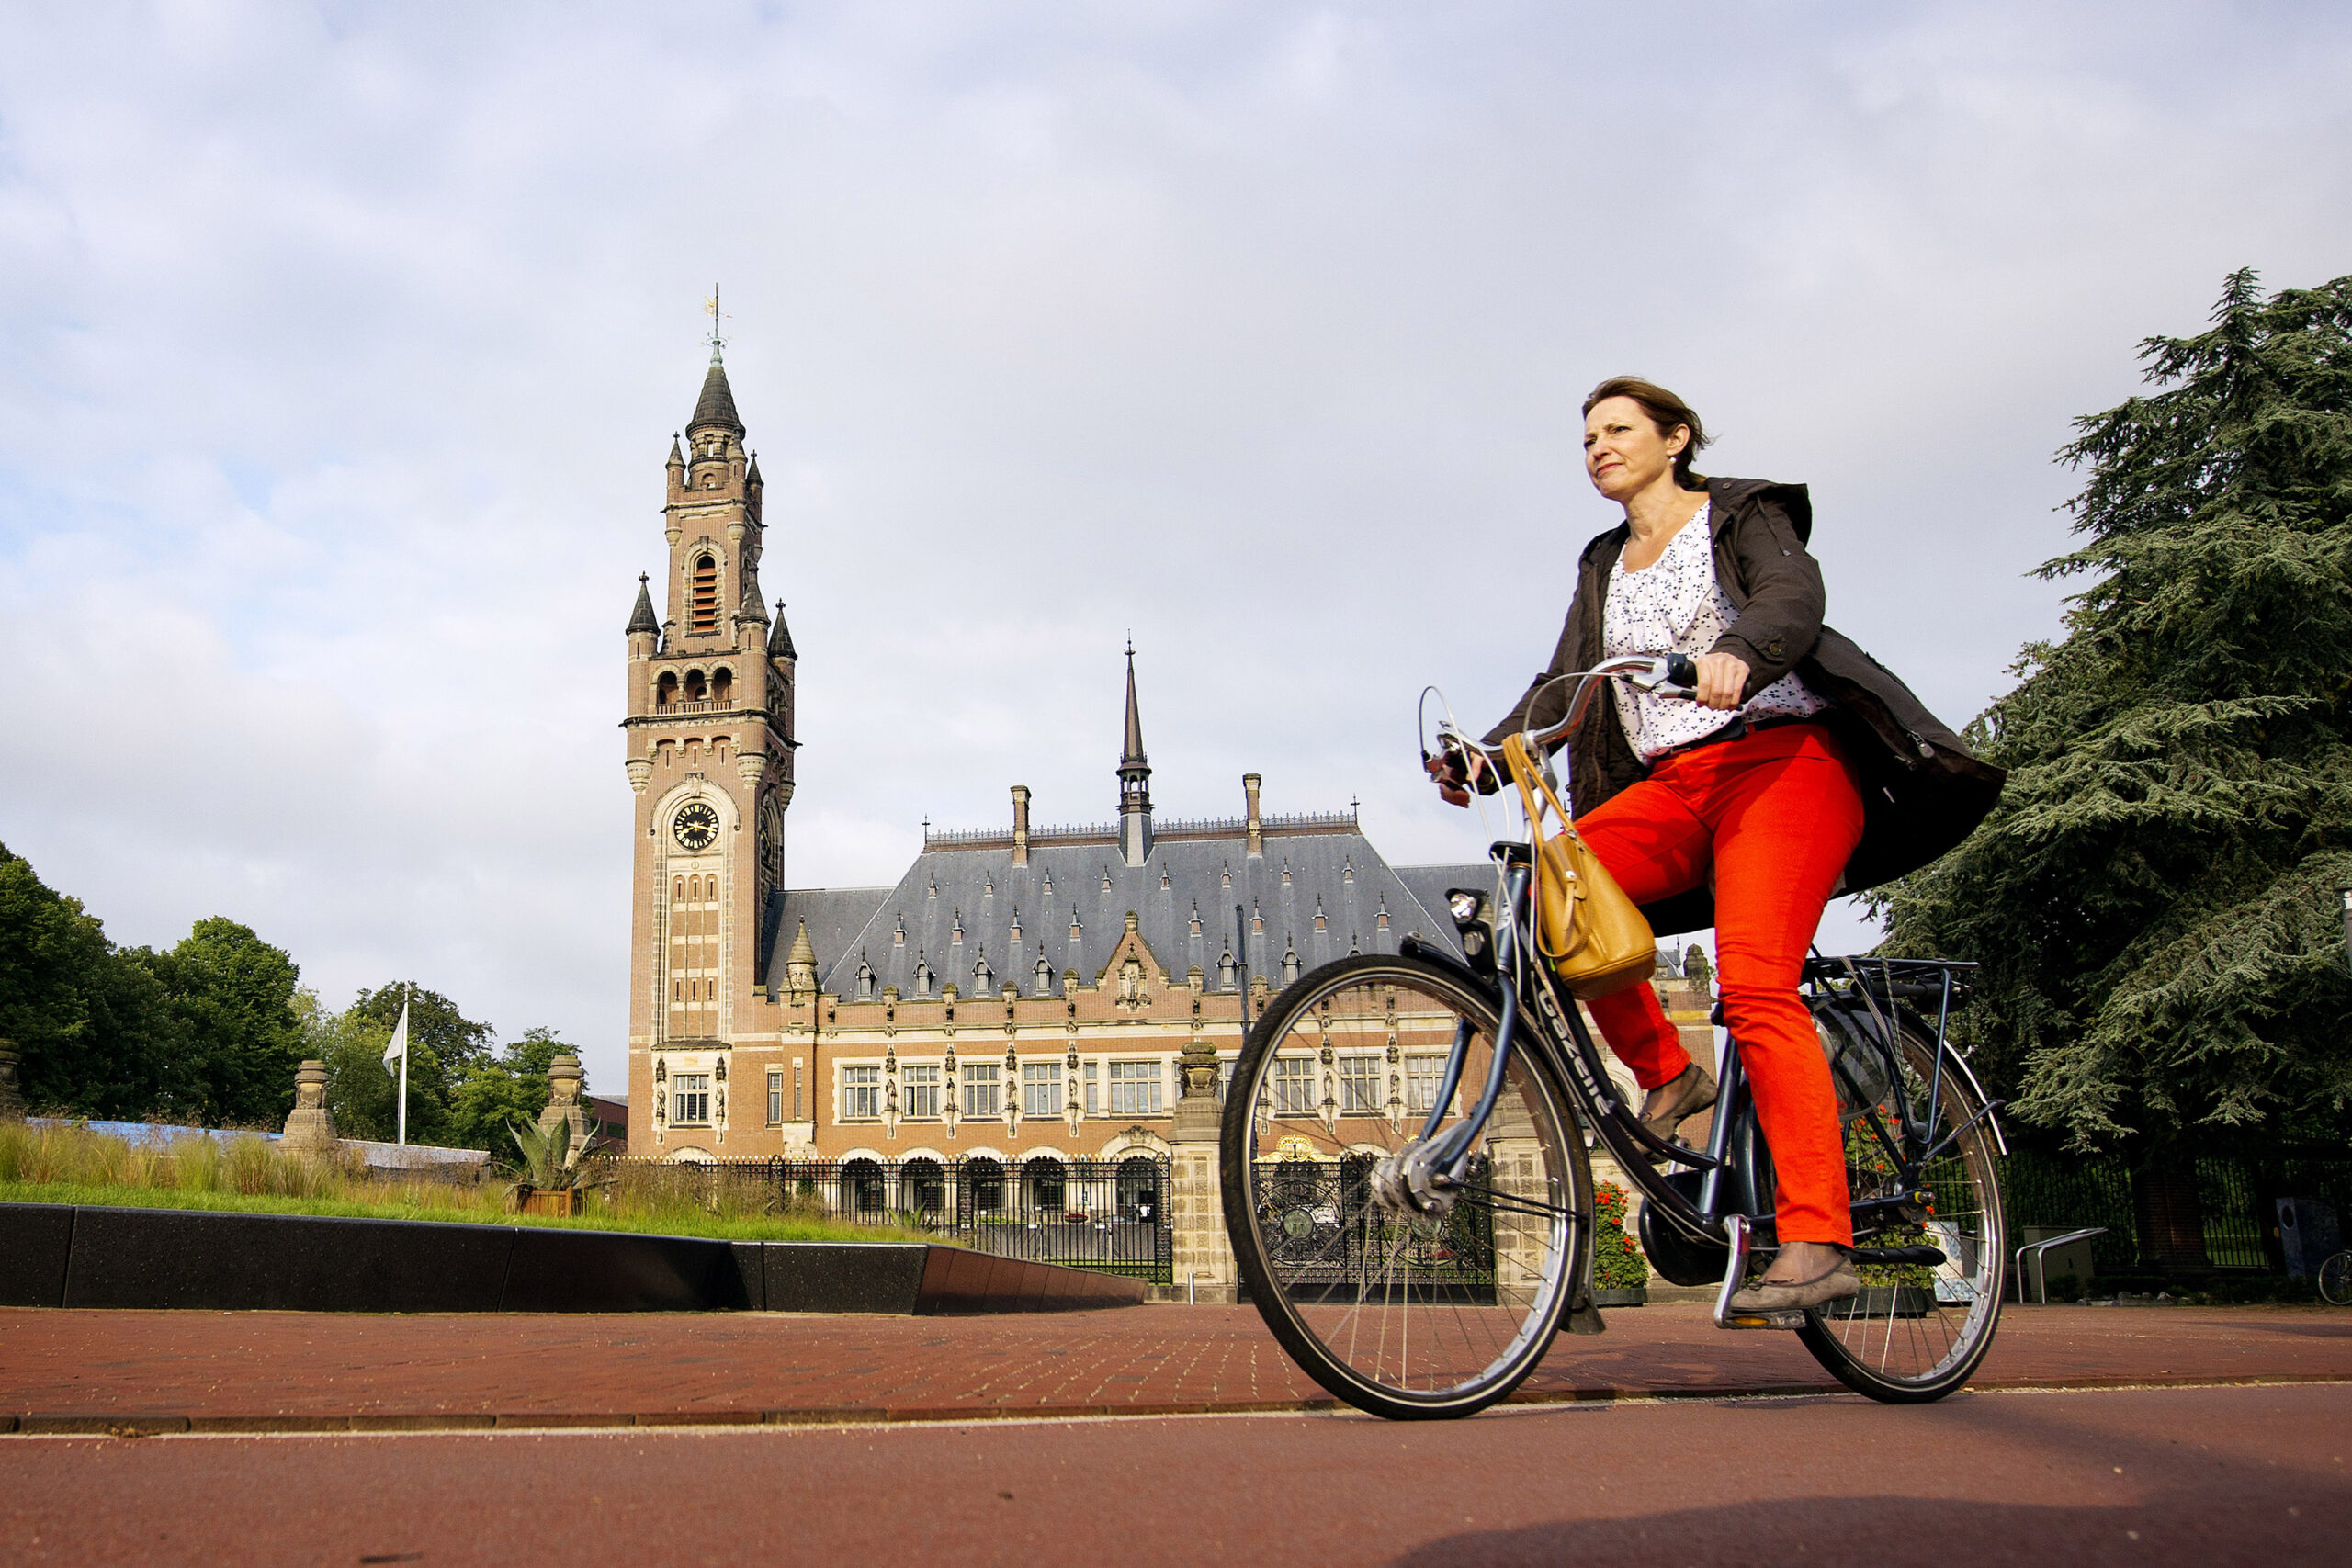 Woman riding a bicycle in the Netherlands